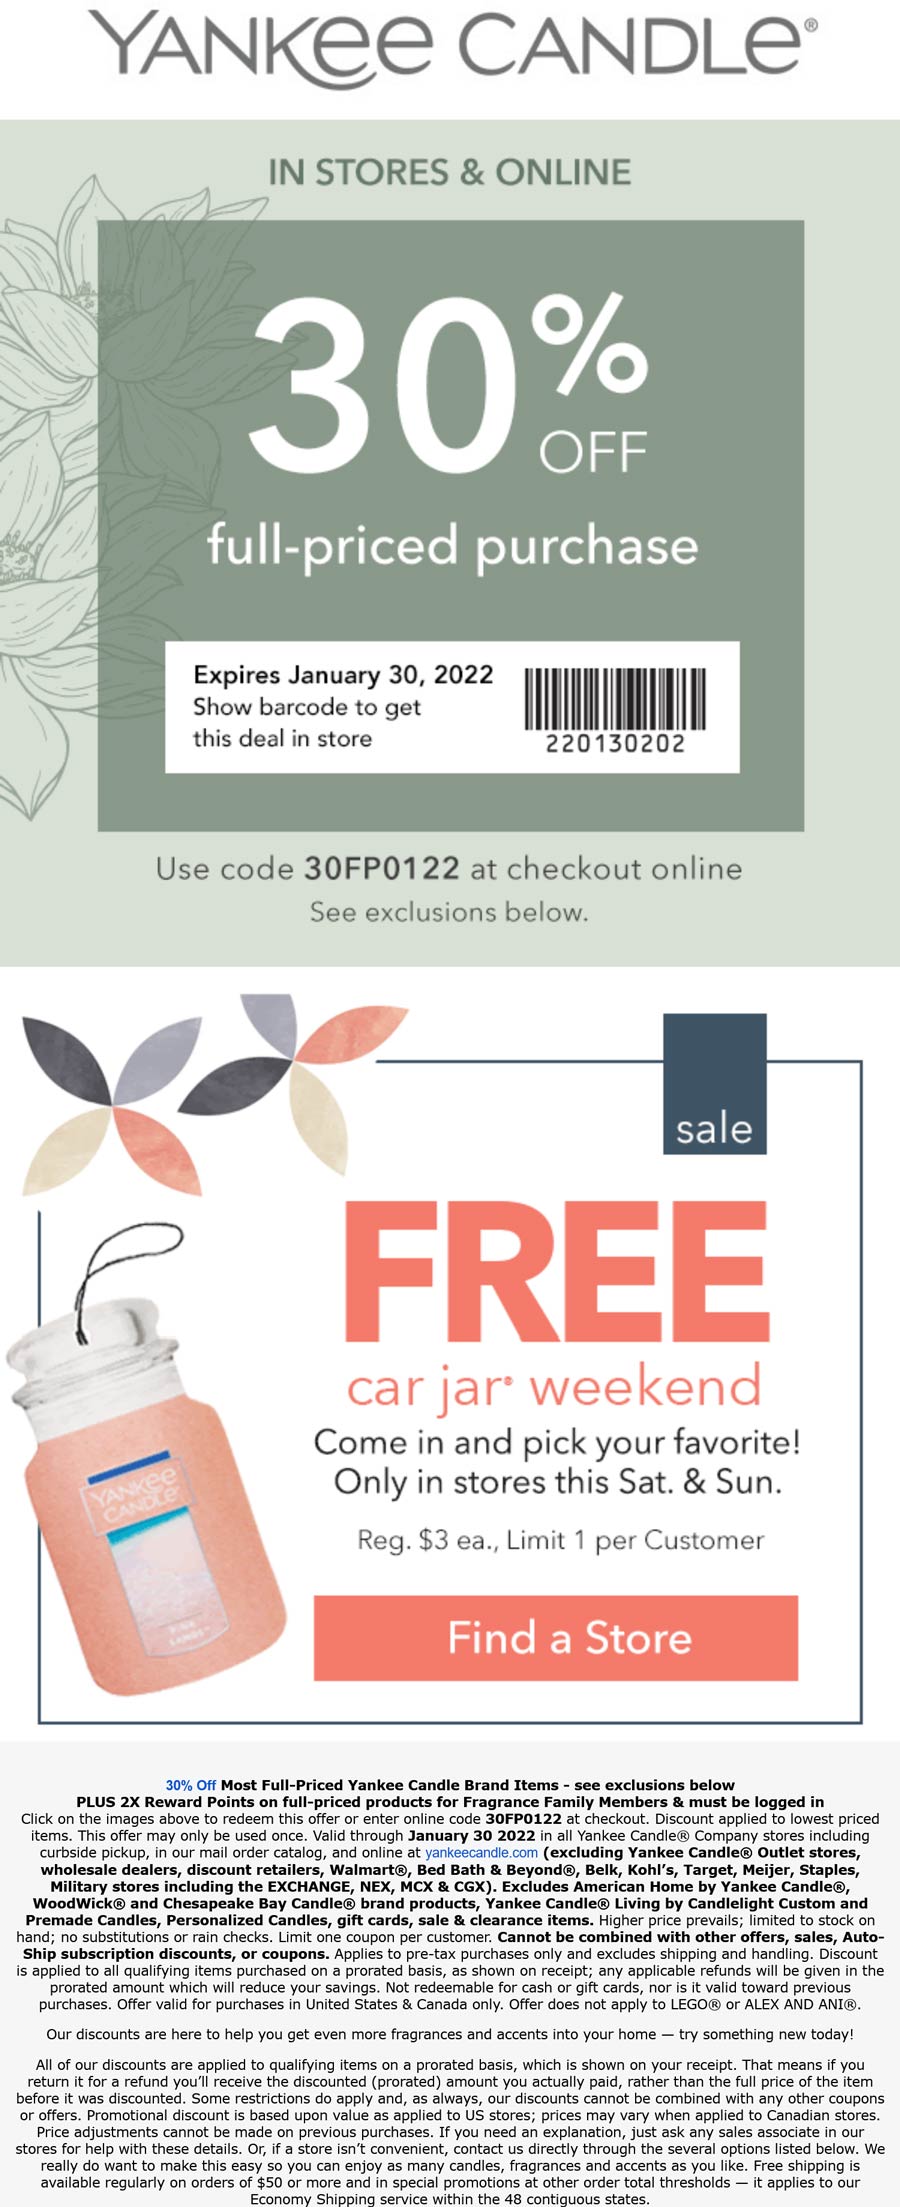 Yankee Candle stores Coupon  30% off at Yankee Candle, or online via promo code 30FP0122 #yankeecandle 